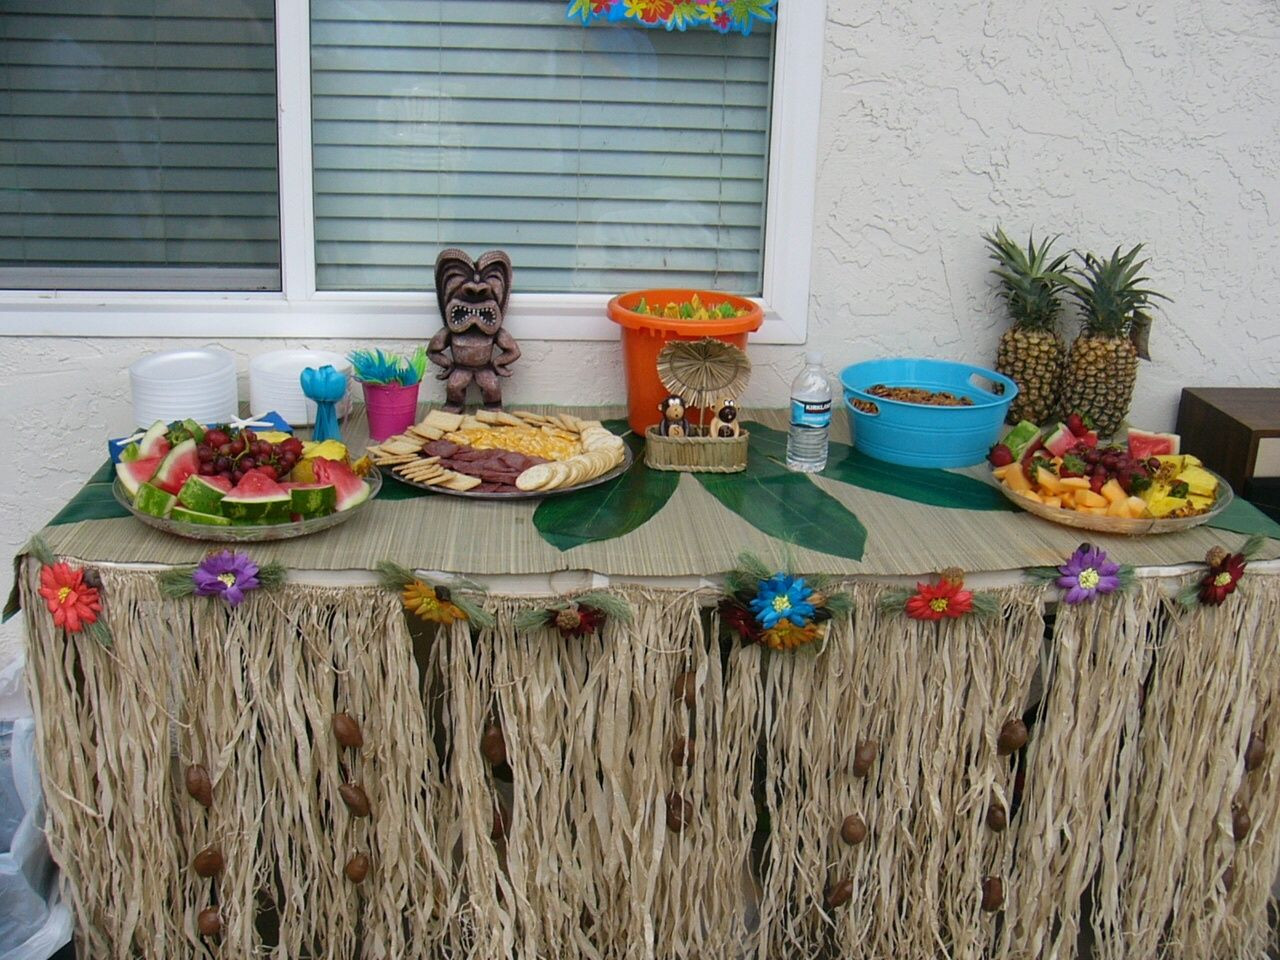 Luau Graduation Party Ideas
 We had a Luau themed graduation party for my daughter and